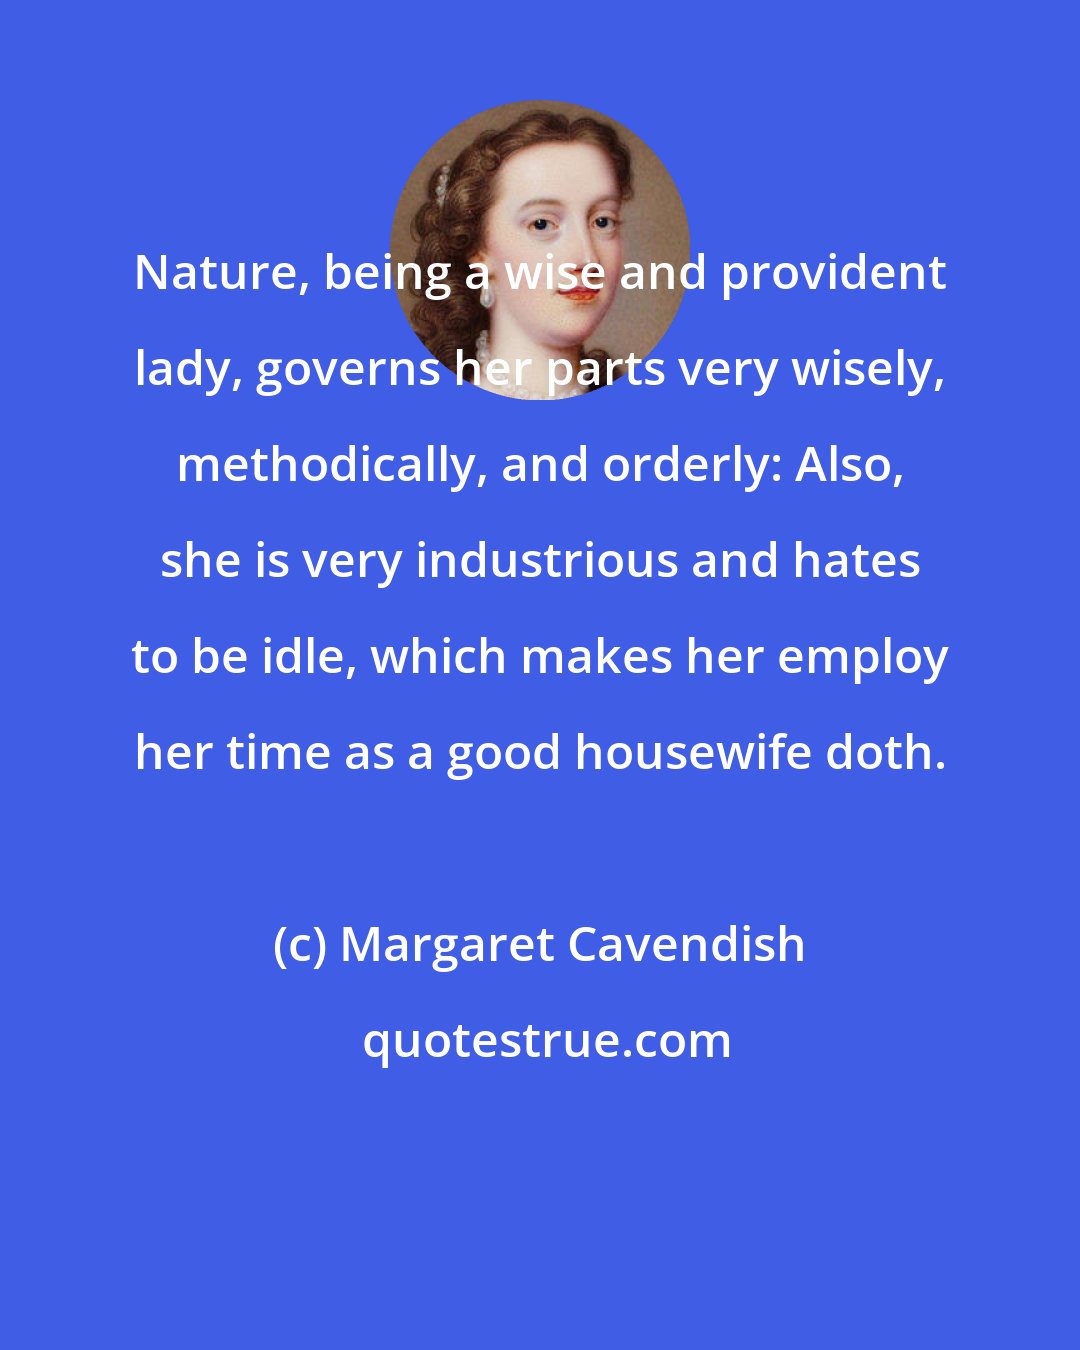 Margaret Cavendish: Nature, being a wise and provident lady, governs her parts very wisely, methodically, and orderly: Also, she is very industrious and hates to be idle, which makes her employ her time as a good housewife doth.